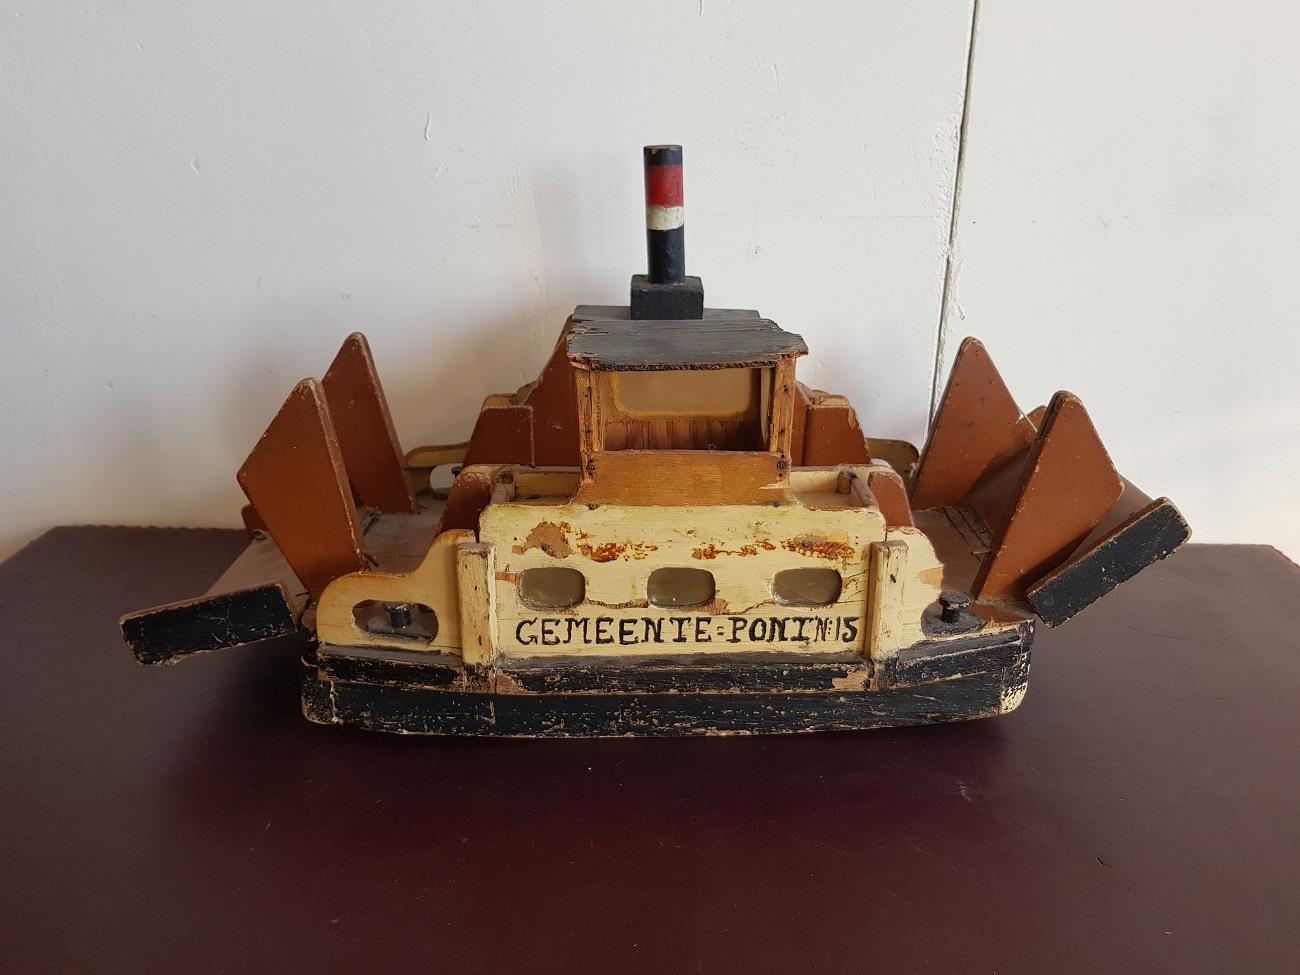 Old homemade wooden toy steam ferry with the text 